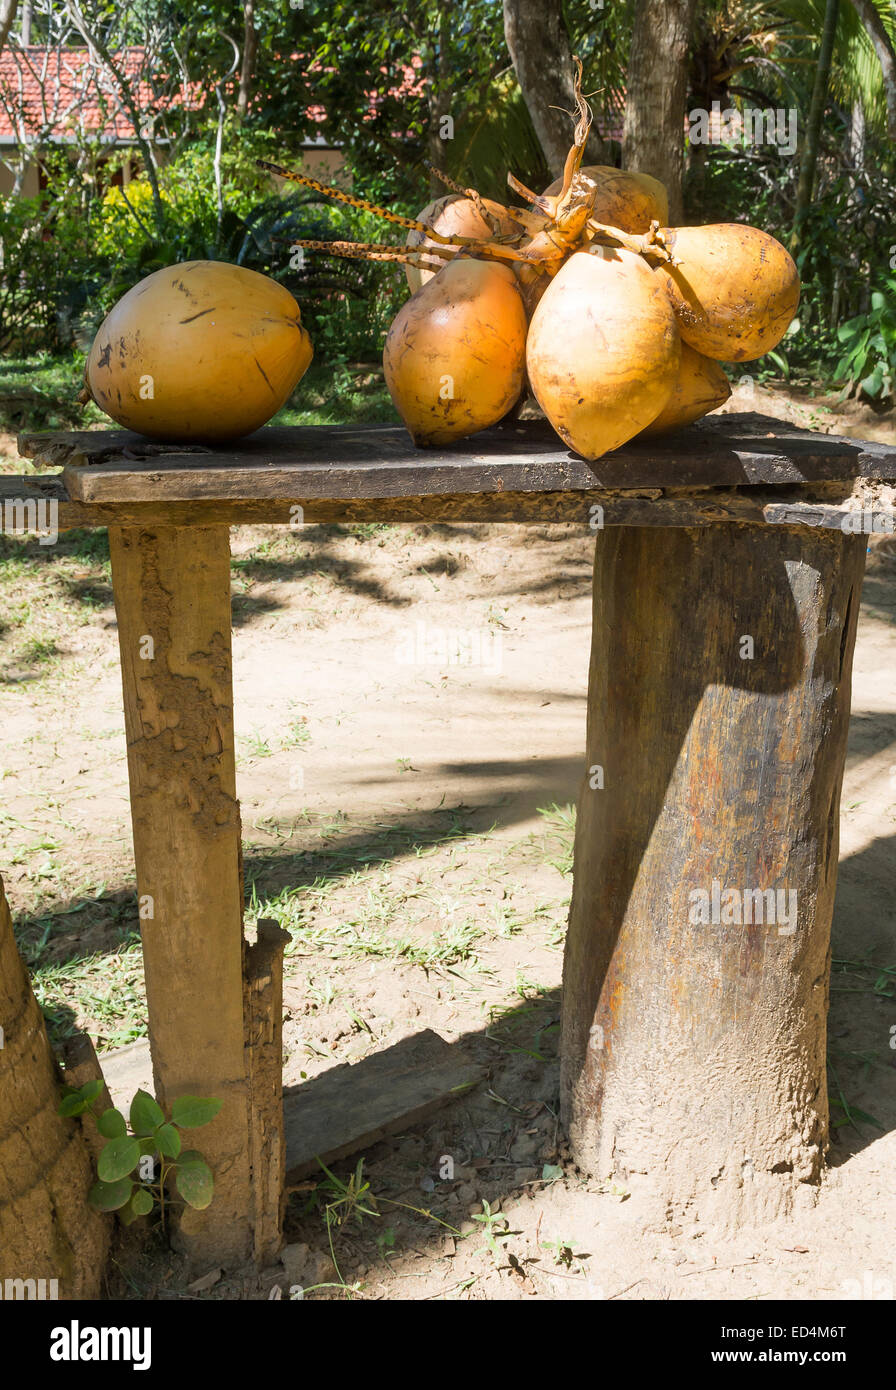 King coconuts collected in Tangalle garden, Tangalle, Southern Province, Sri Lanka, Asia. Stock Photo